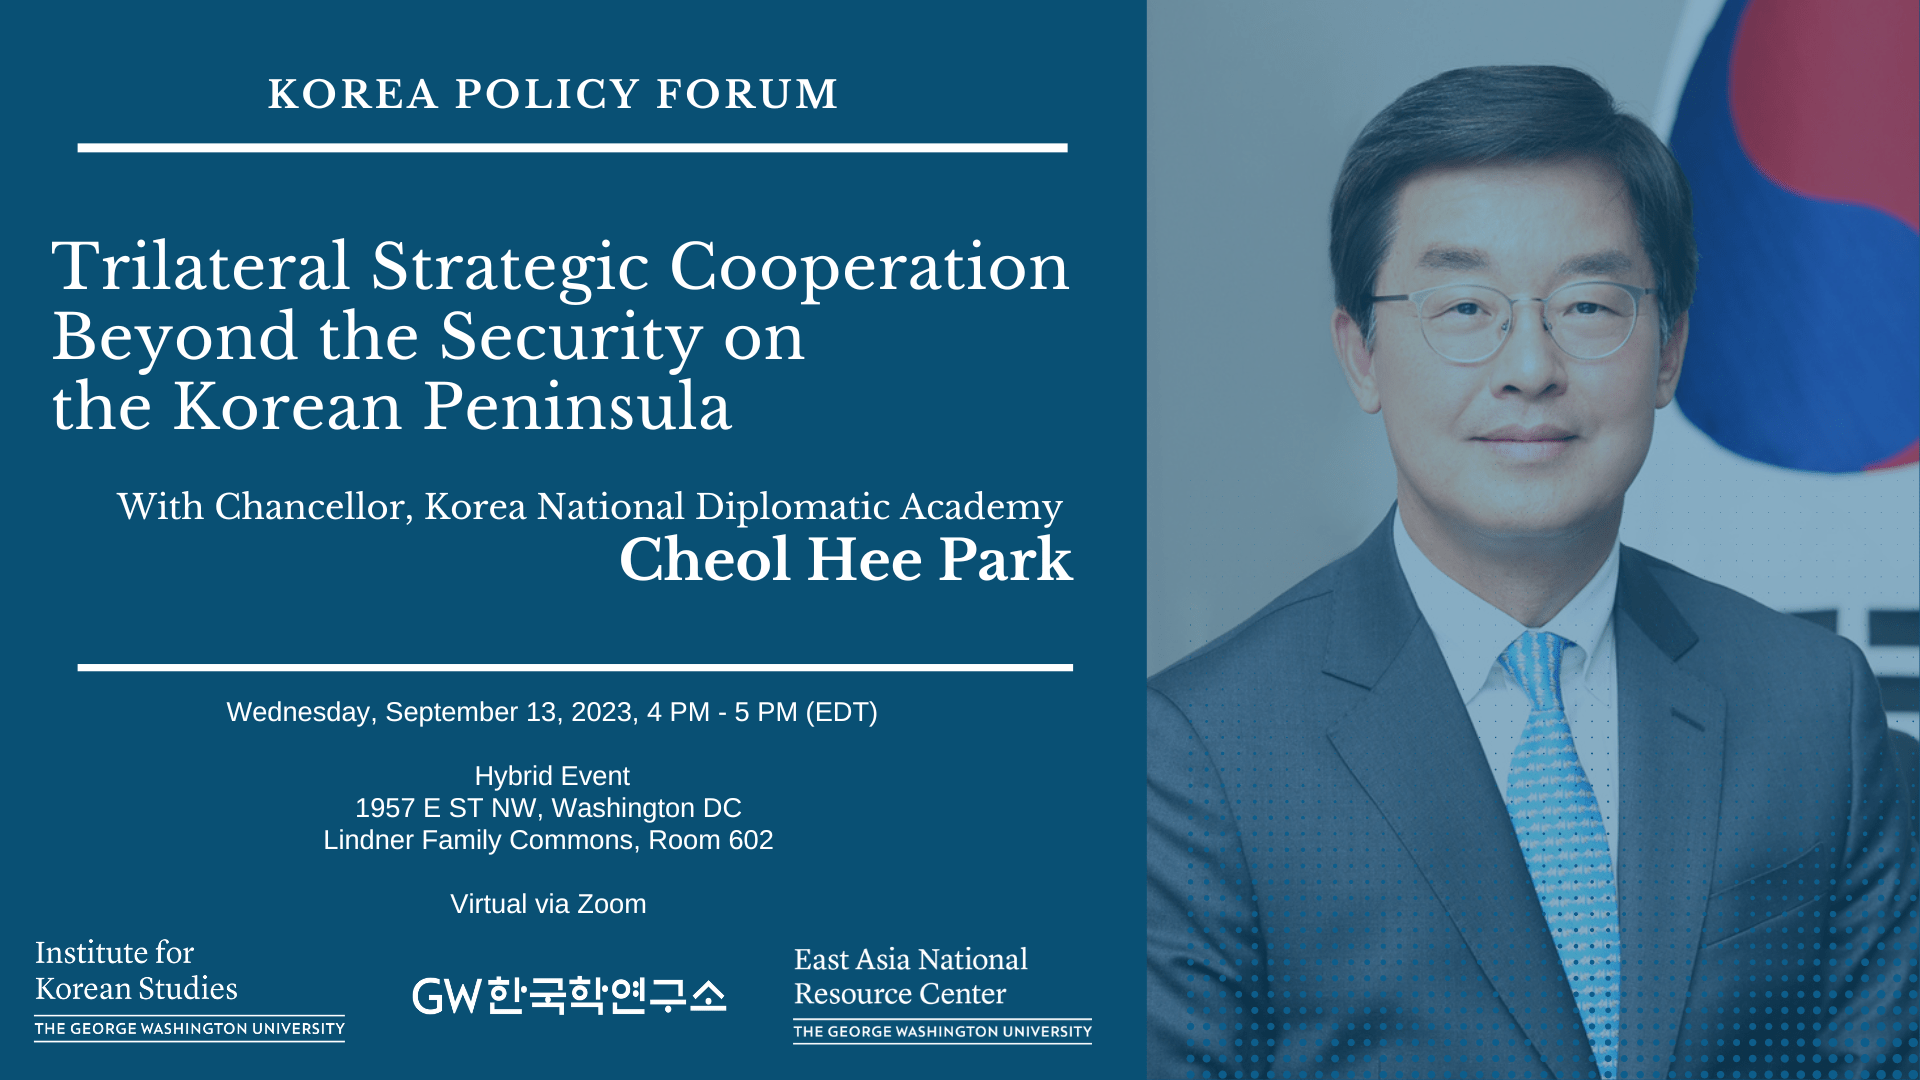  KOREA POLICY FORUM Trilateral Strategic Cooperation Beyond the Security on the Korean Peninsula With Chancellor, Korea National Diplomatic Academy Cheol Hee Park Wednesday, September 13, 2023, 4 PM - 5 PM (EDT) Institute for Korean Studies Hybrid Event 1957 E ST NW, Washington DC Lindner Family Commons, Room 602 THE GEORGE WASHINGTON UNIVERSITY Virtual via Zoom GW한국학연구소 East Asia National Resource Center THE GEORGE WASHINGTON UNIVERSITY 